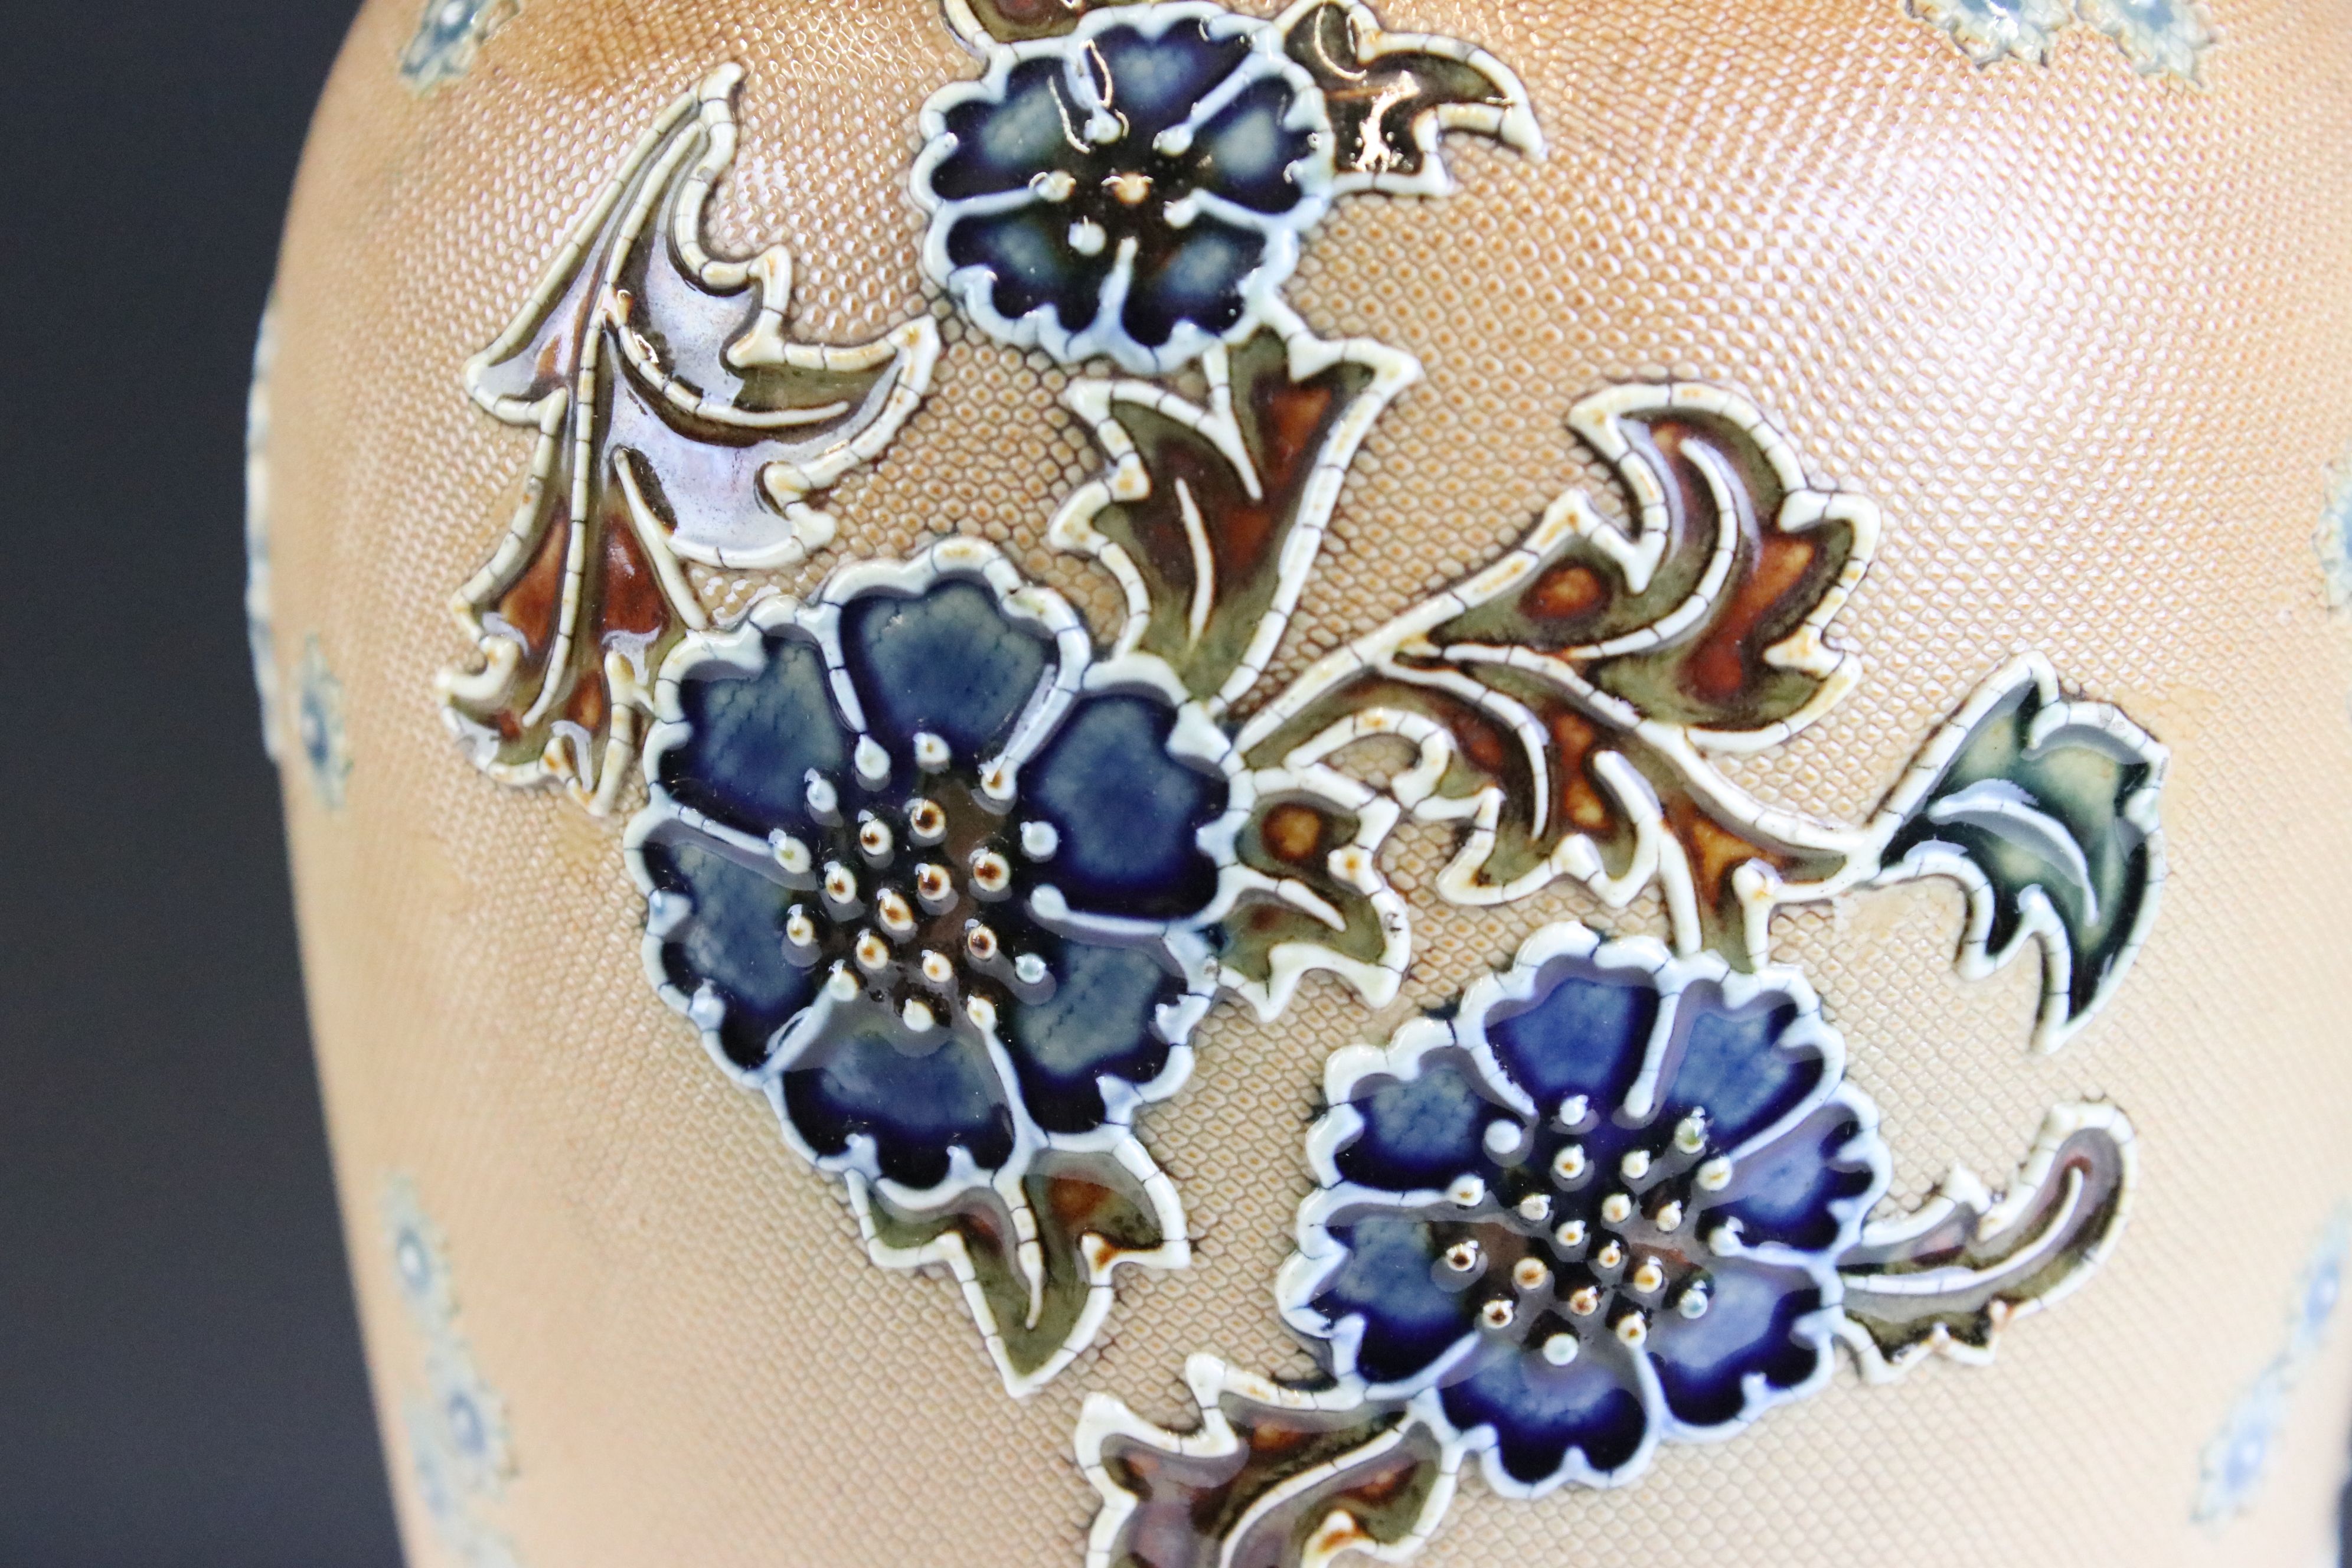 Two antique Doulton vases to include a Royal Doulton ewer jug with a blue drip glaze and gilt panels - Image 7 of 9